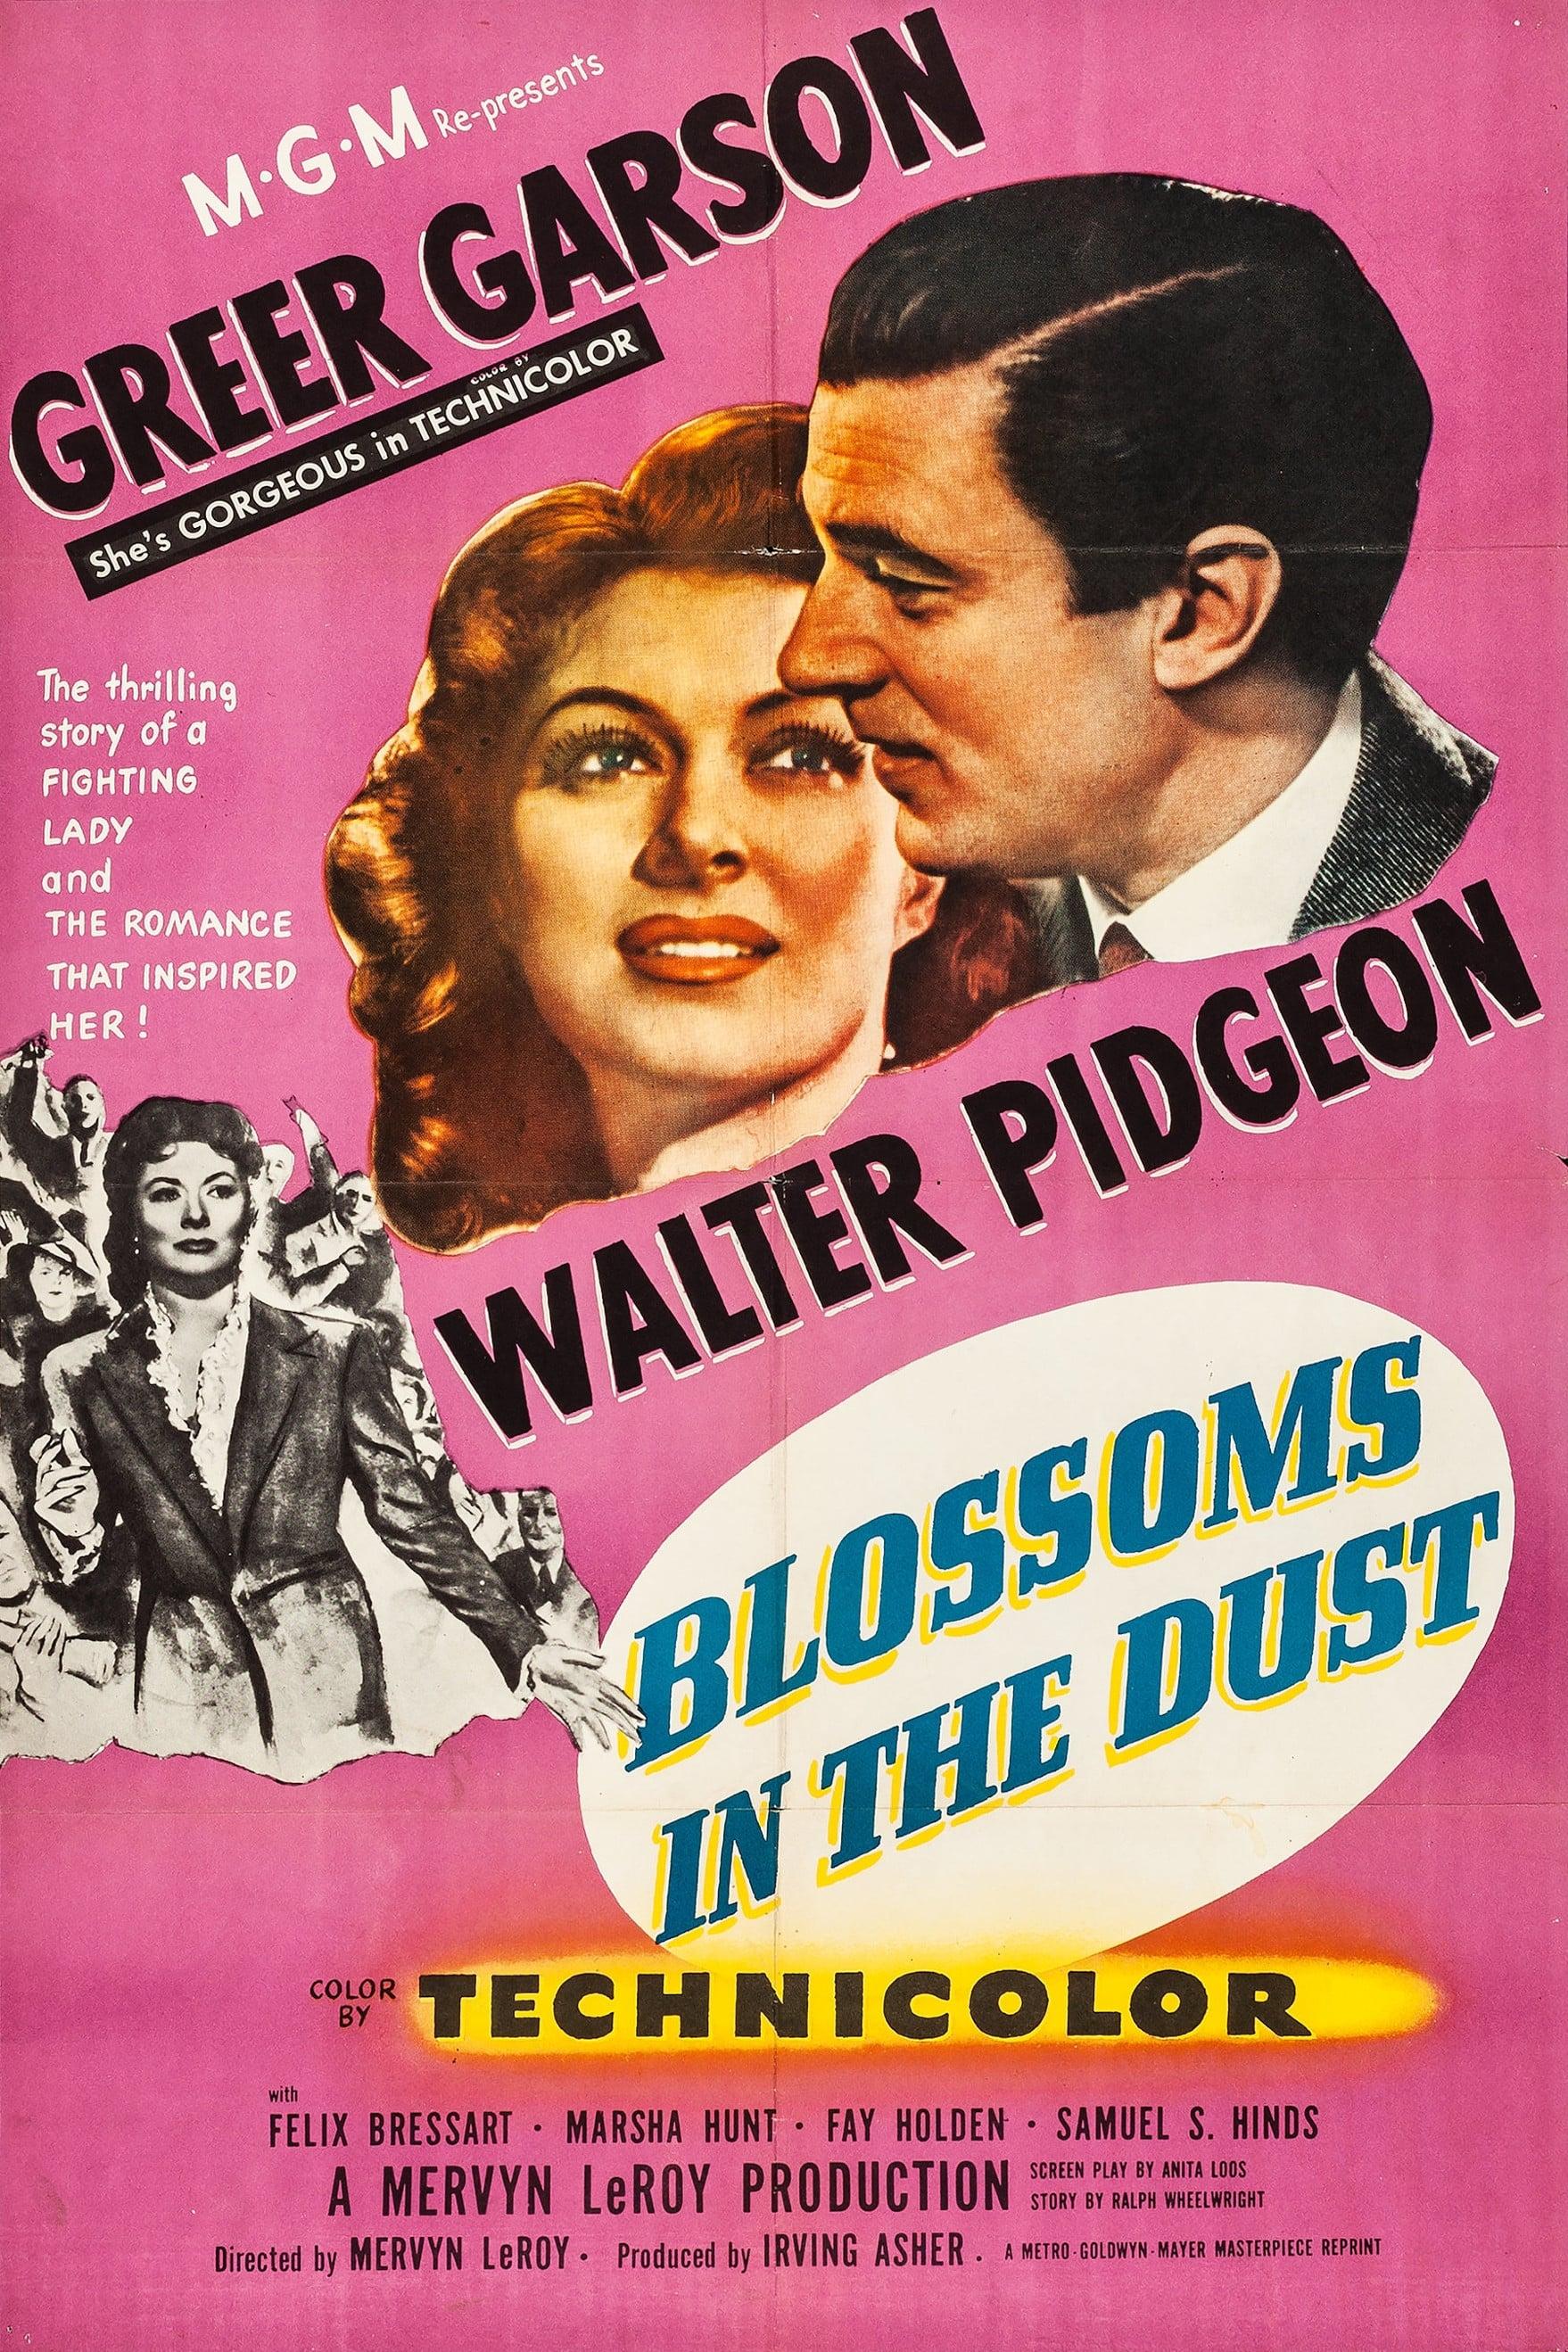 Blossoms in the Dust poster